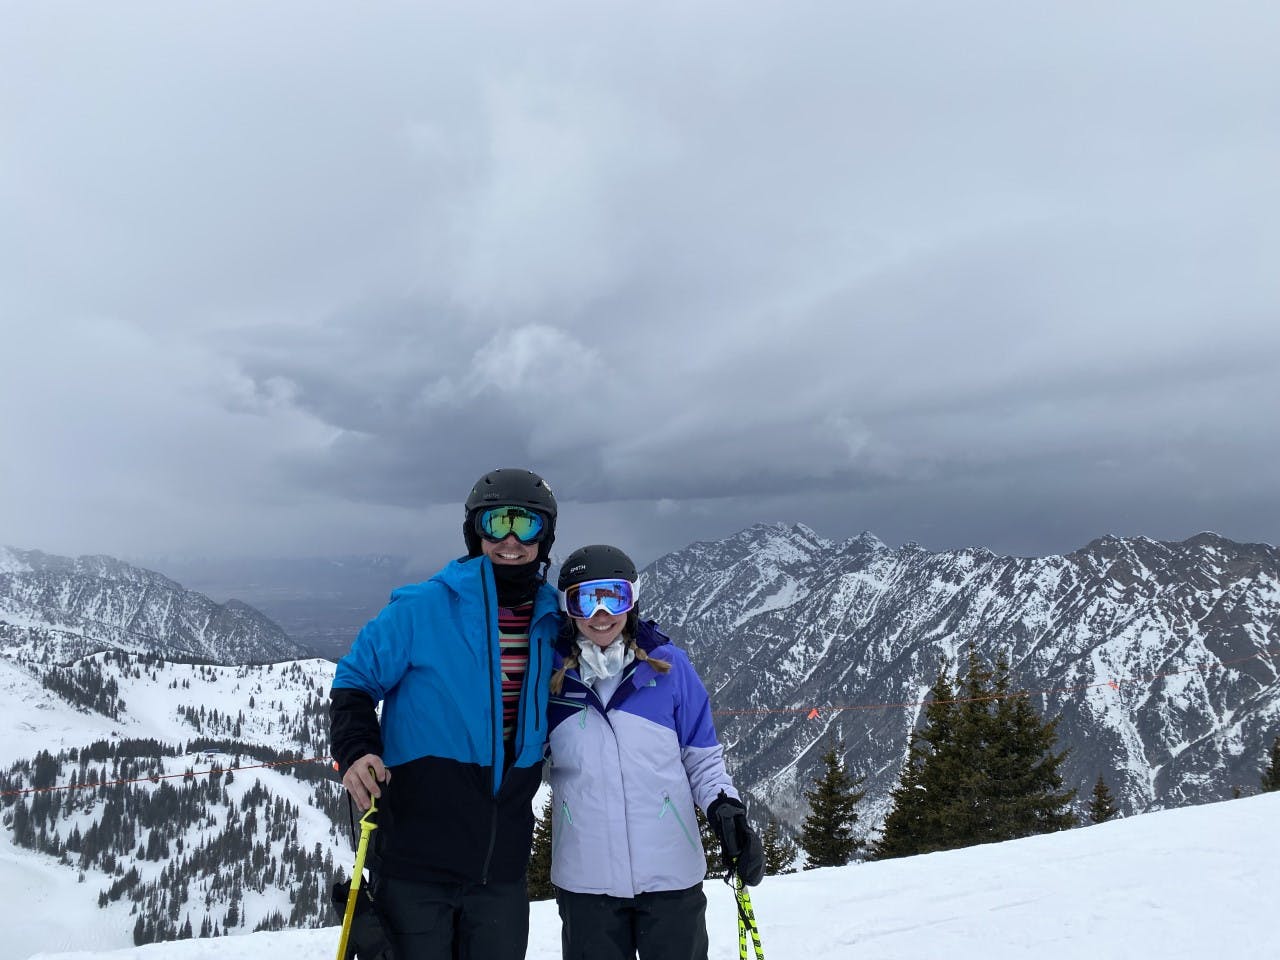 Two skier stand at the top of Snowbird ski resort. Both are wearing full ski gear.